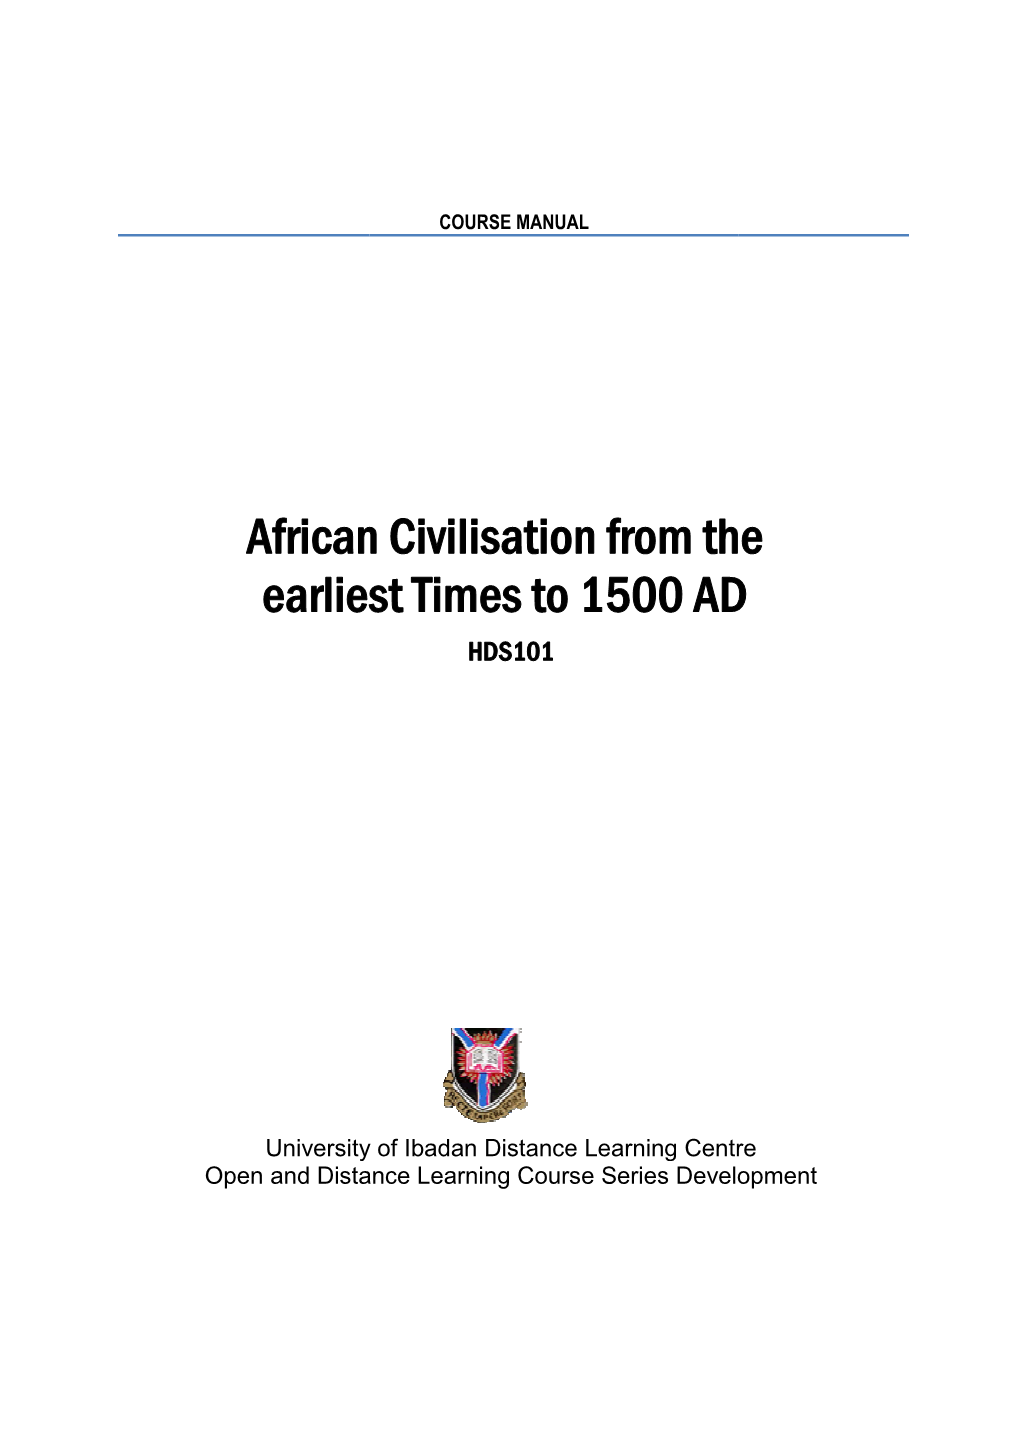 African Civilisation from the Earliest Times to 1500 AD HDS101